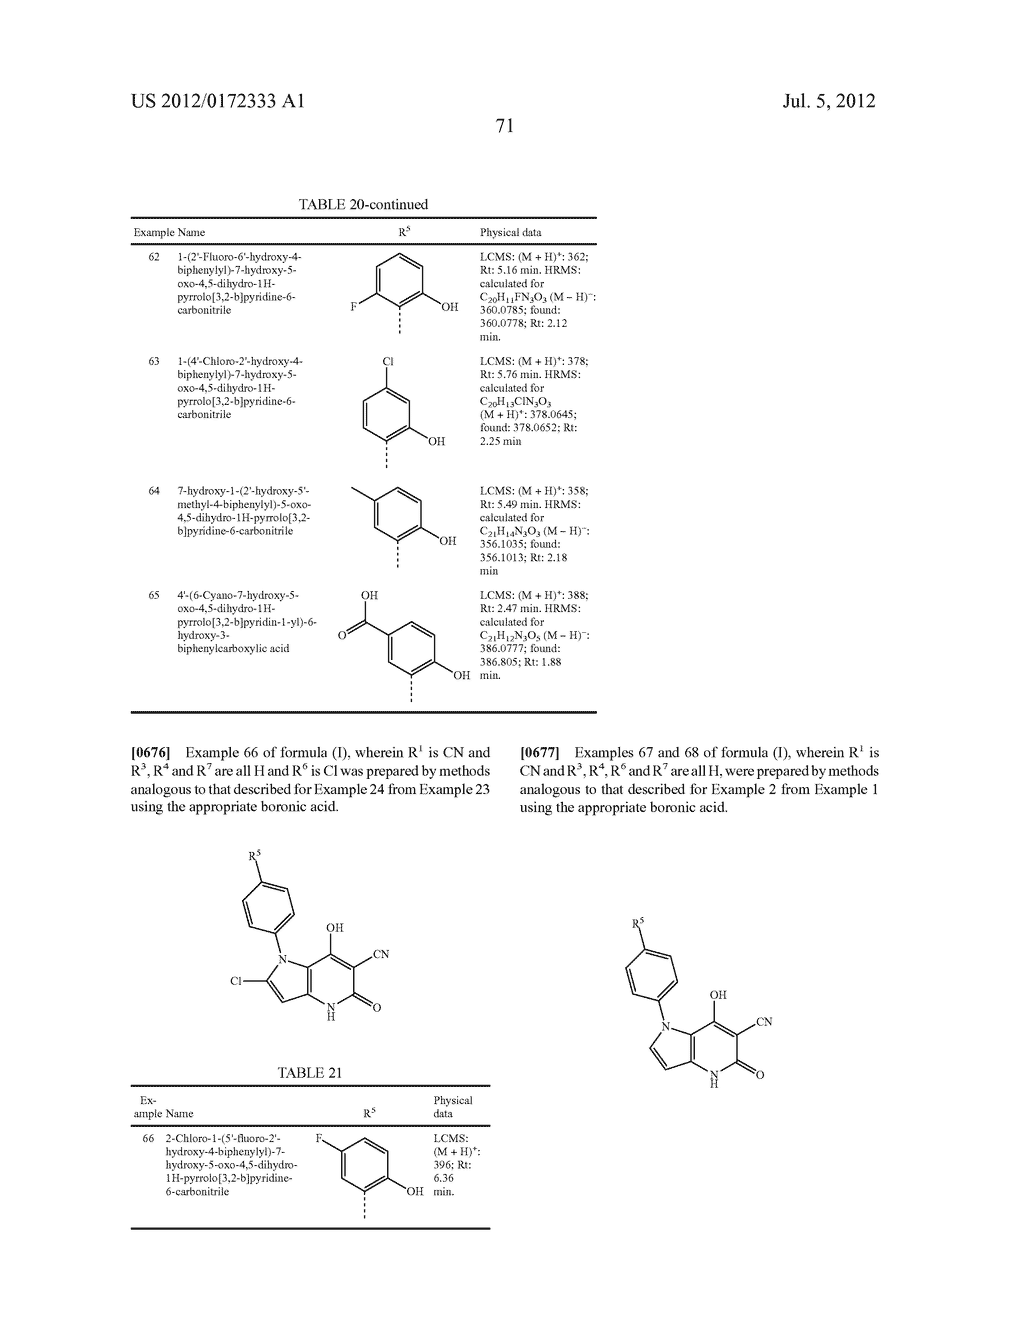 PYRROLO-PYRIDINE DERIVATIVES AS ACTIVATORS OF AMPK - diagram, schematic, and image 72